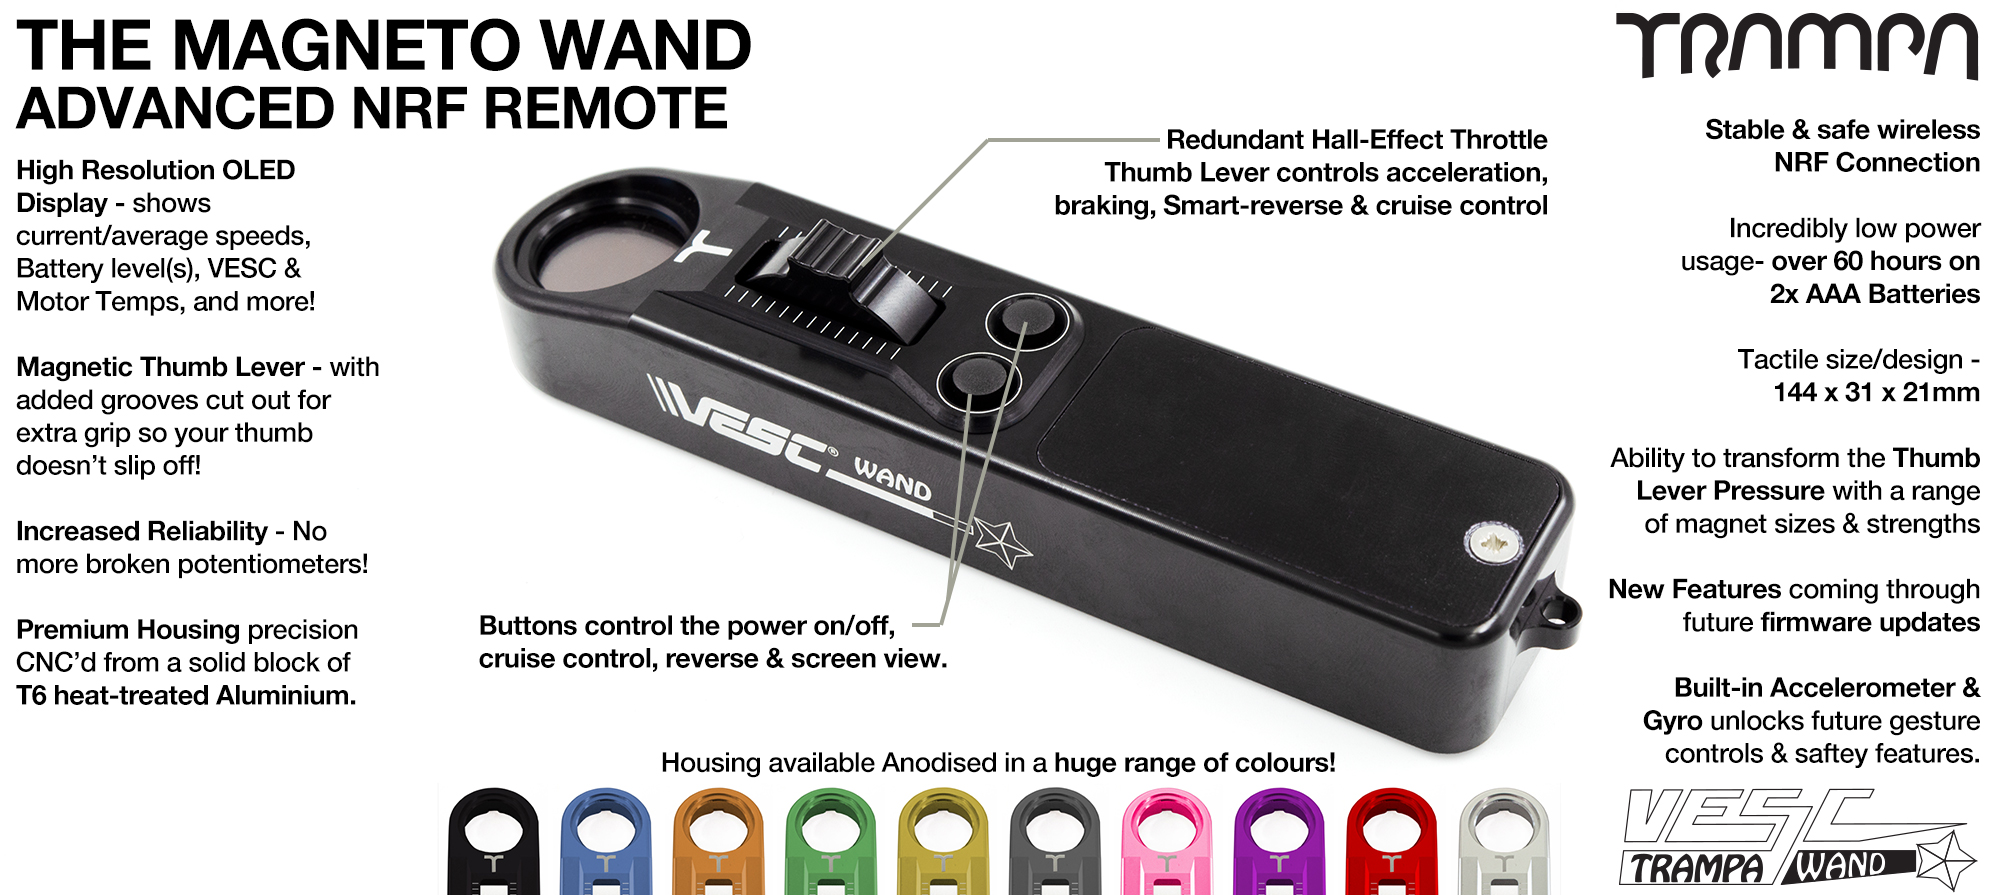 TRAMPA's VESC based MAGNETO WAND Remote Control is due to arrive from the future very soon 